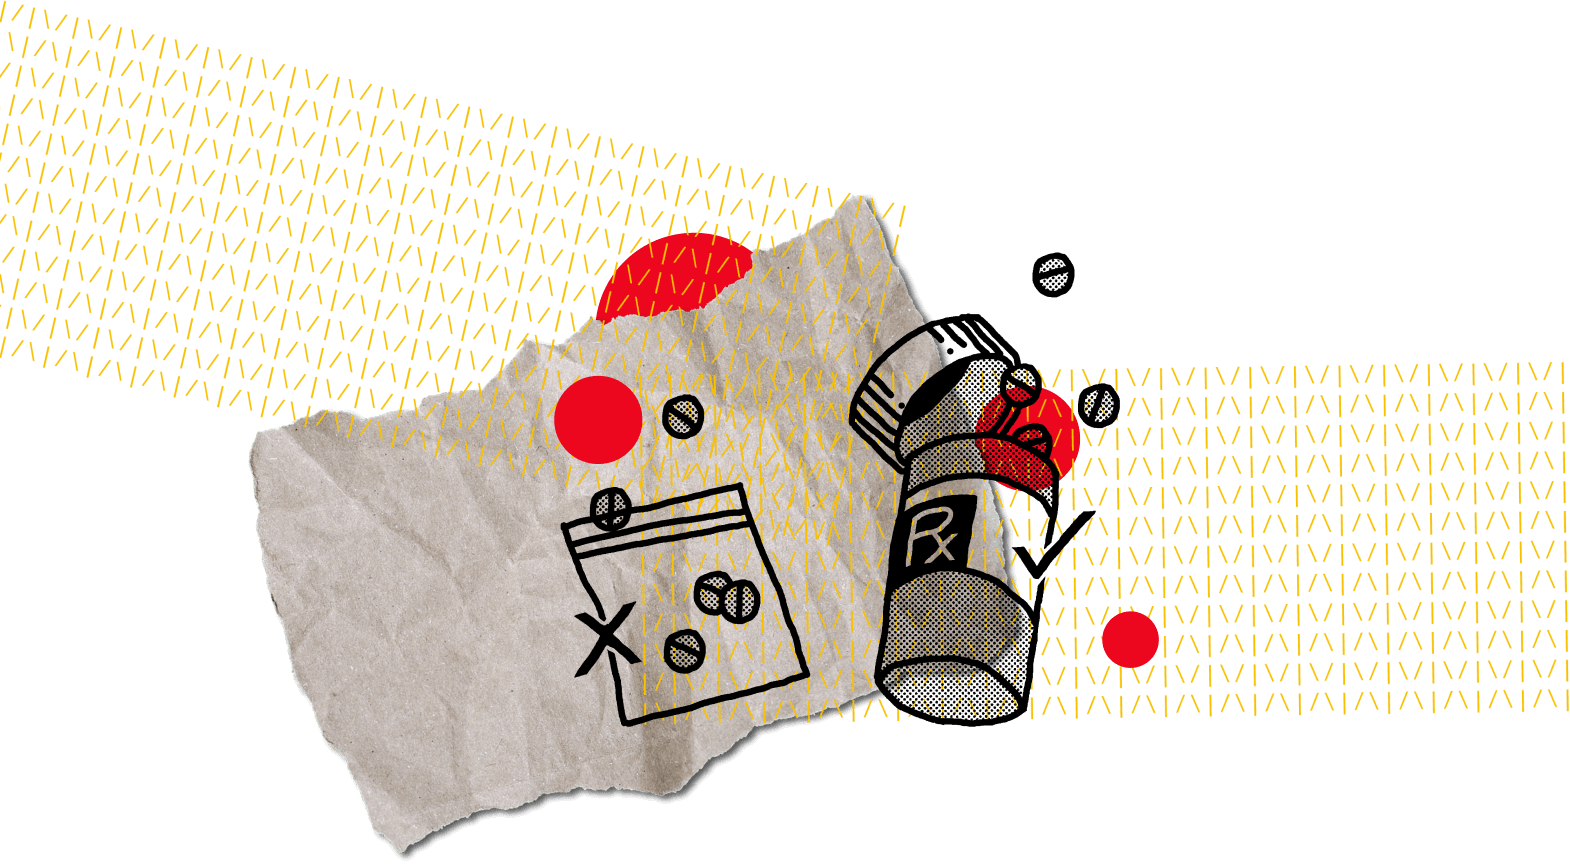 Illustration of unidentified pills in a bag marked with an x next to a prescribed pill bottle marked with a check collaged on top of ripped paper, red dots, and yellow textured lines.